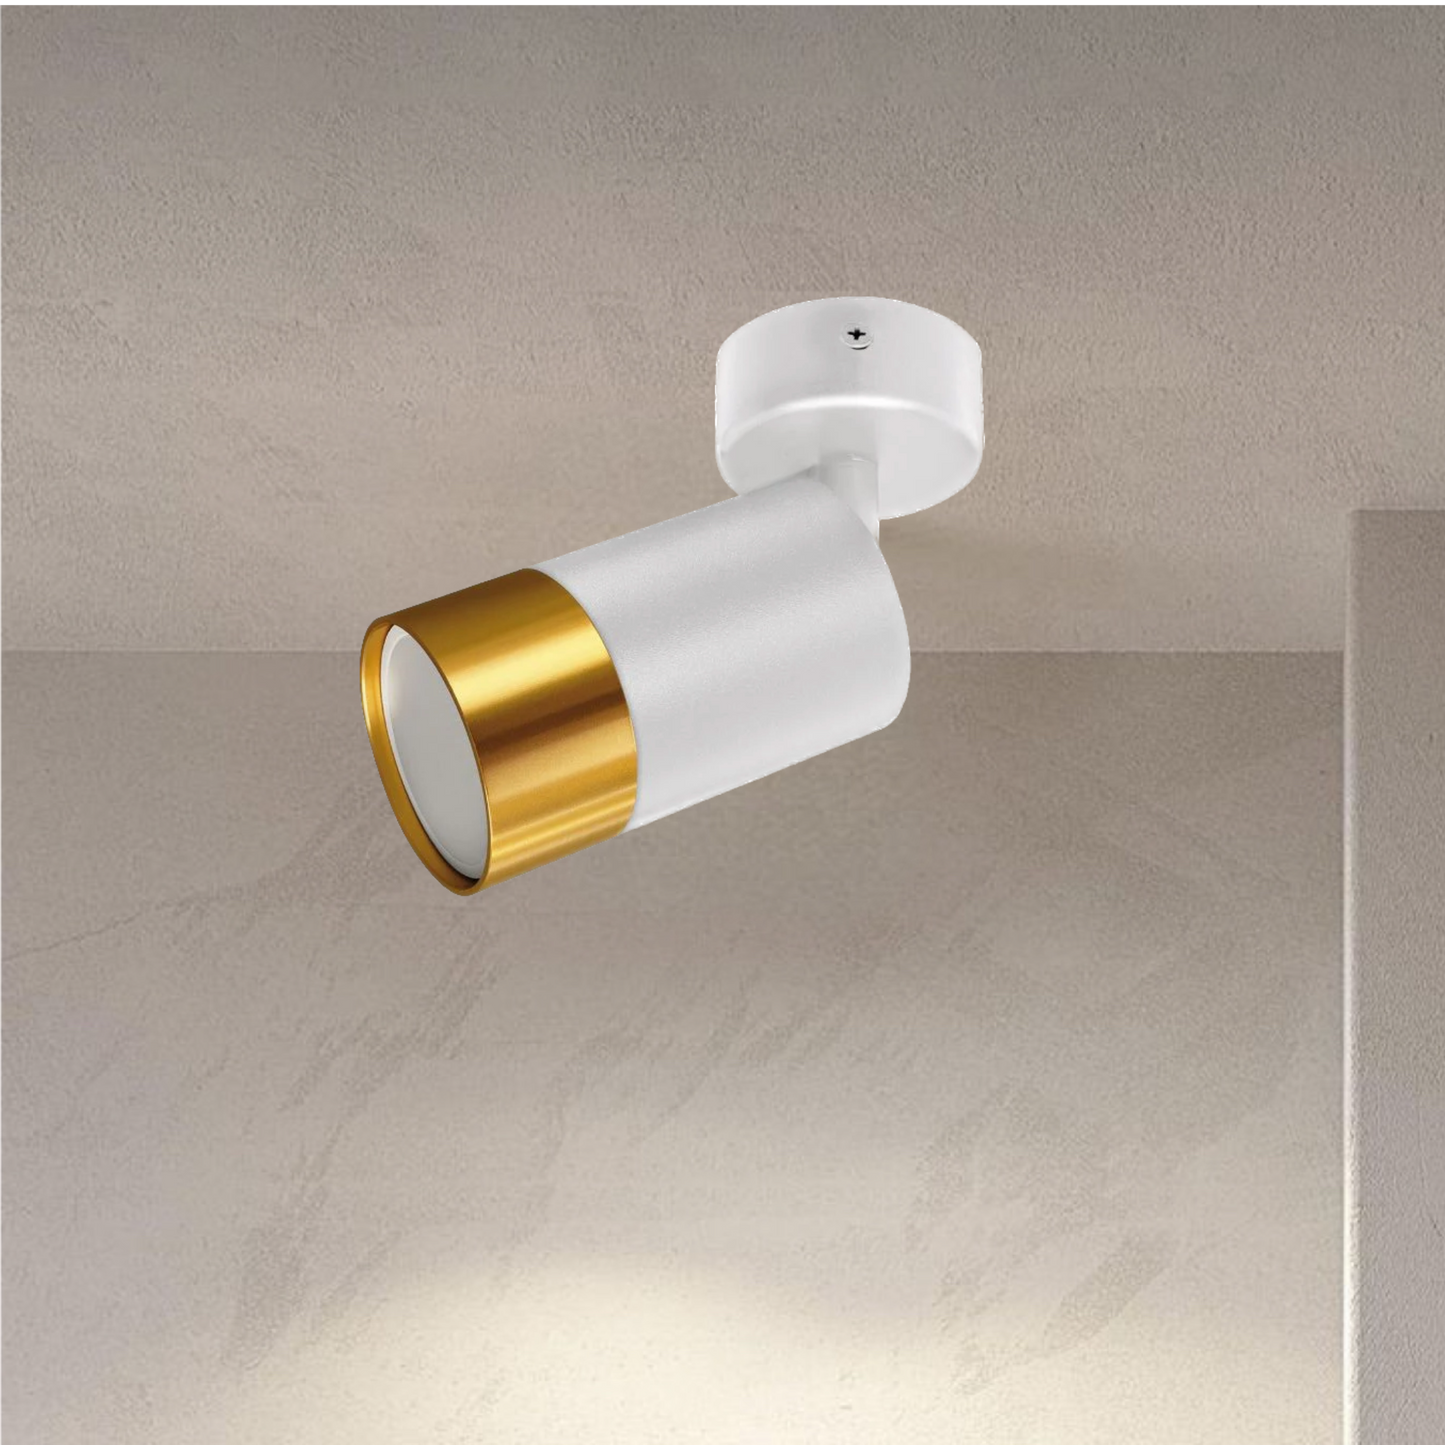 Our Puzon adjustable wall or ceiling spot light has a sleek and modern circular design with a powder coated exterior and gold interior. A simple, white spotlight is a perfect complement to classic or modern interiors the Puzon can be mounted on either wall or ceiling. Ideal for the kitchen, dining room, bedroom, or living room. It has an IP20 rating, indicating that it is dustproof.